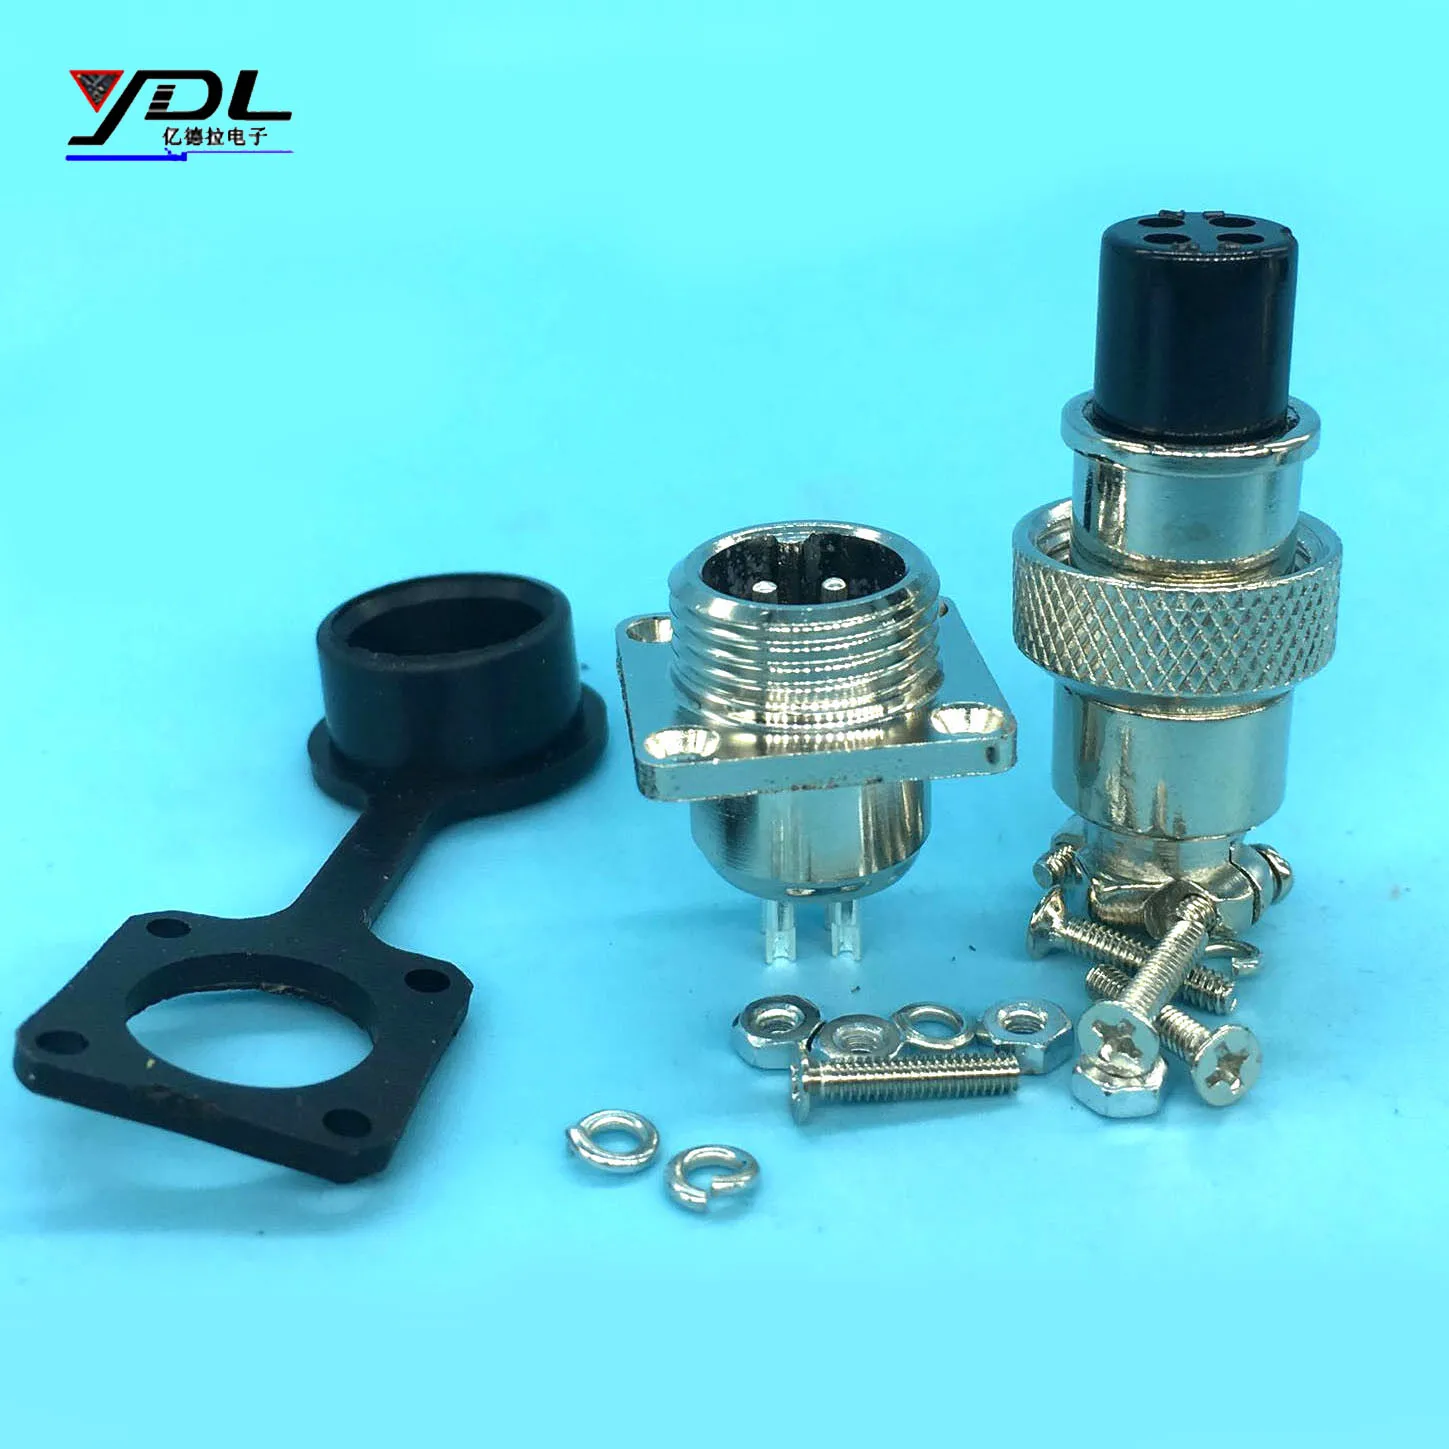 2 Sets GX12 4 Pin Aviation Socket Plug Male Female 12mm Square Panel Cable Connector With Dust Cover Cap Screw